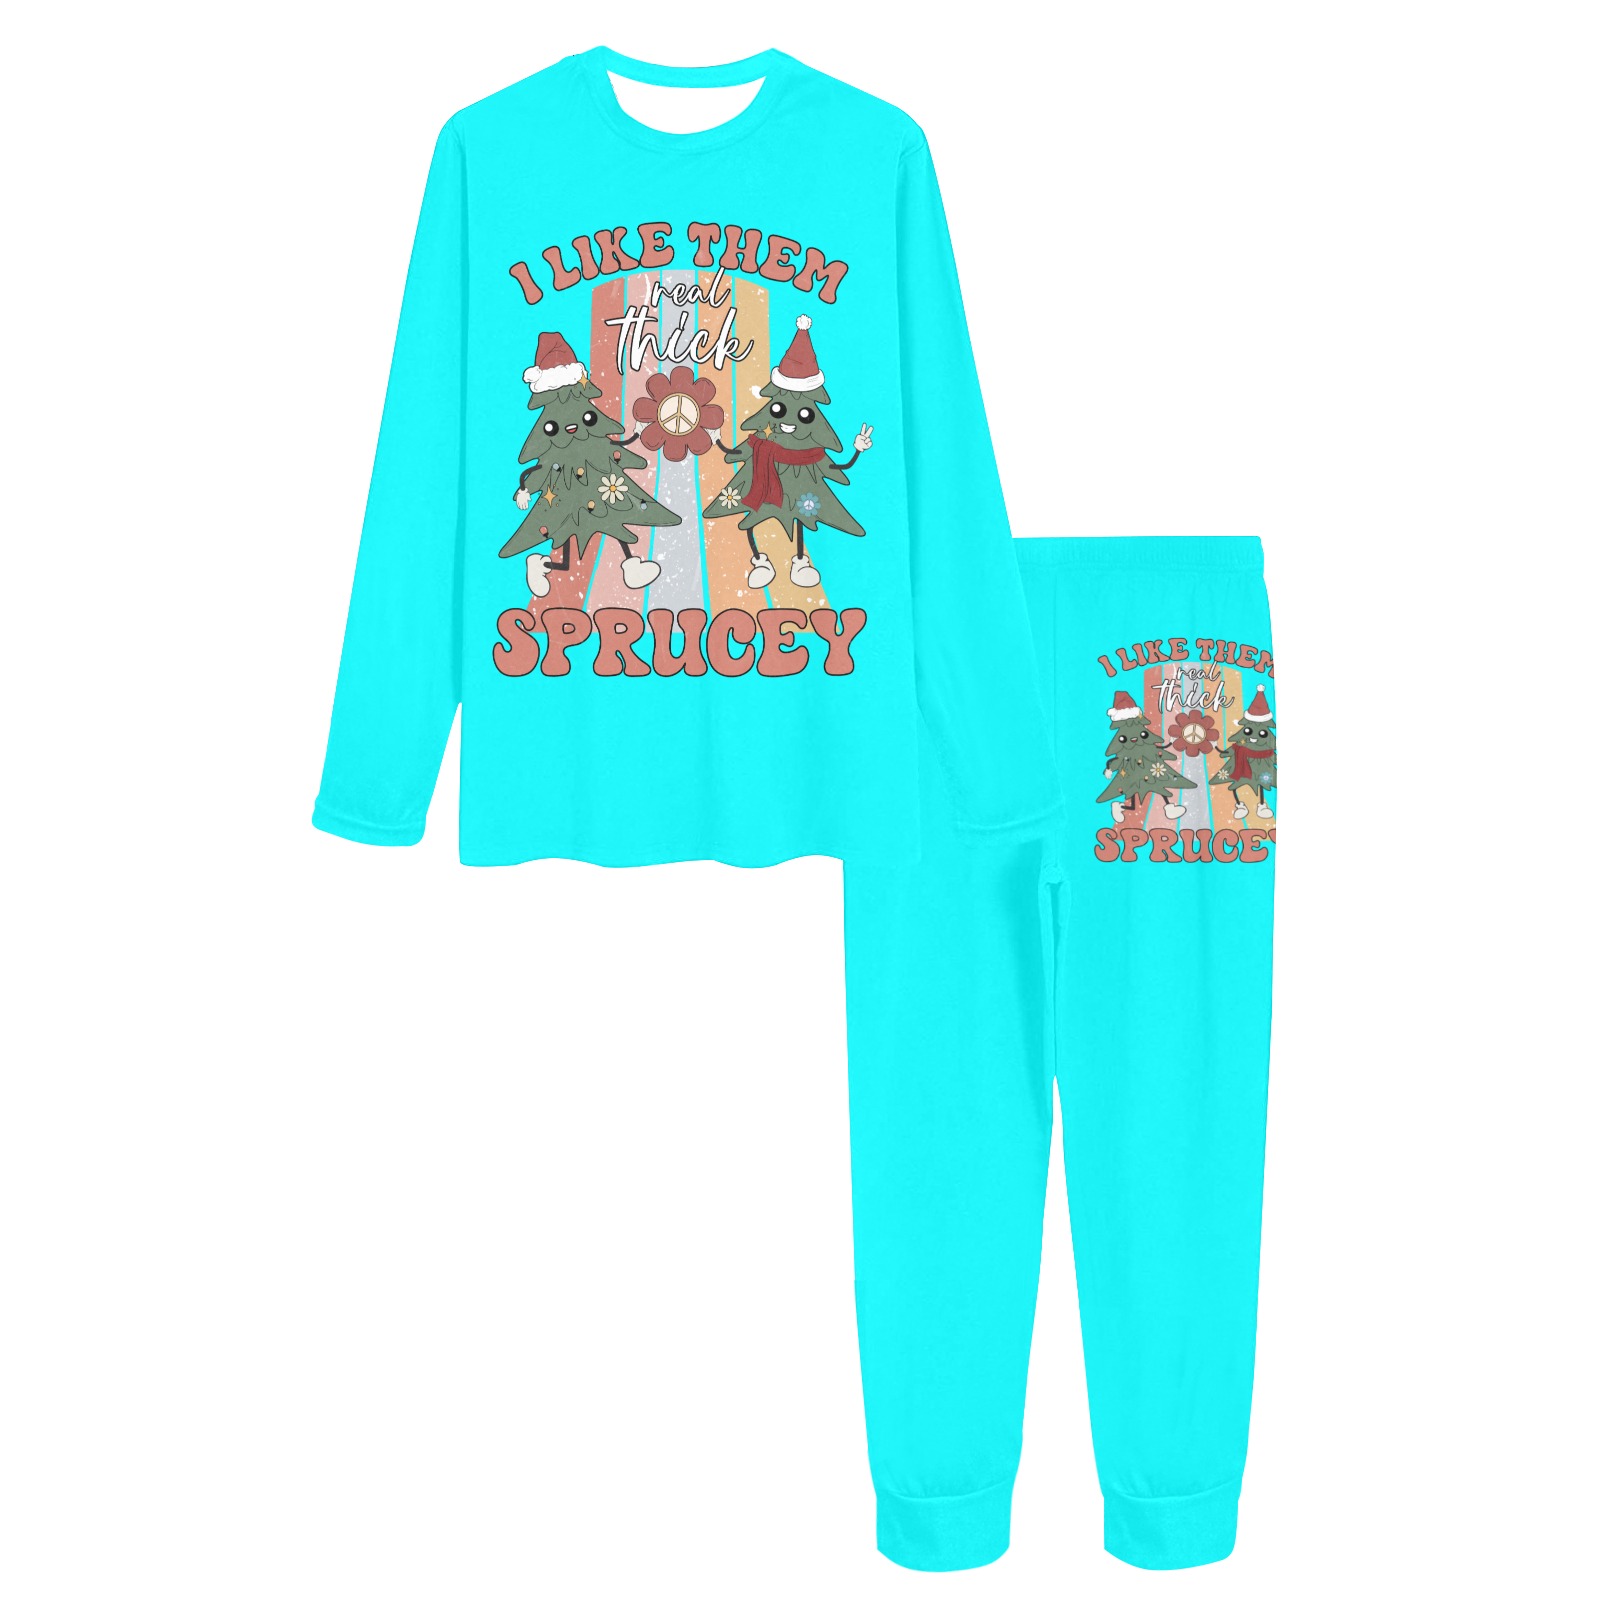 I Like The Real Thick And Sprucey (LB) Women's All Over Print Pajama Set